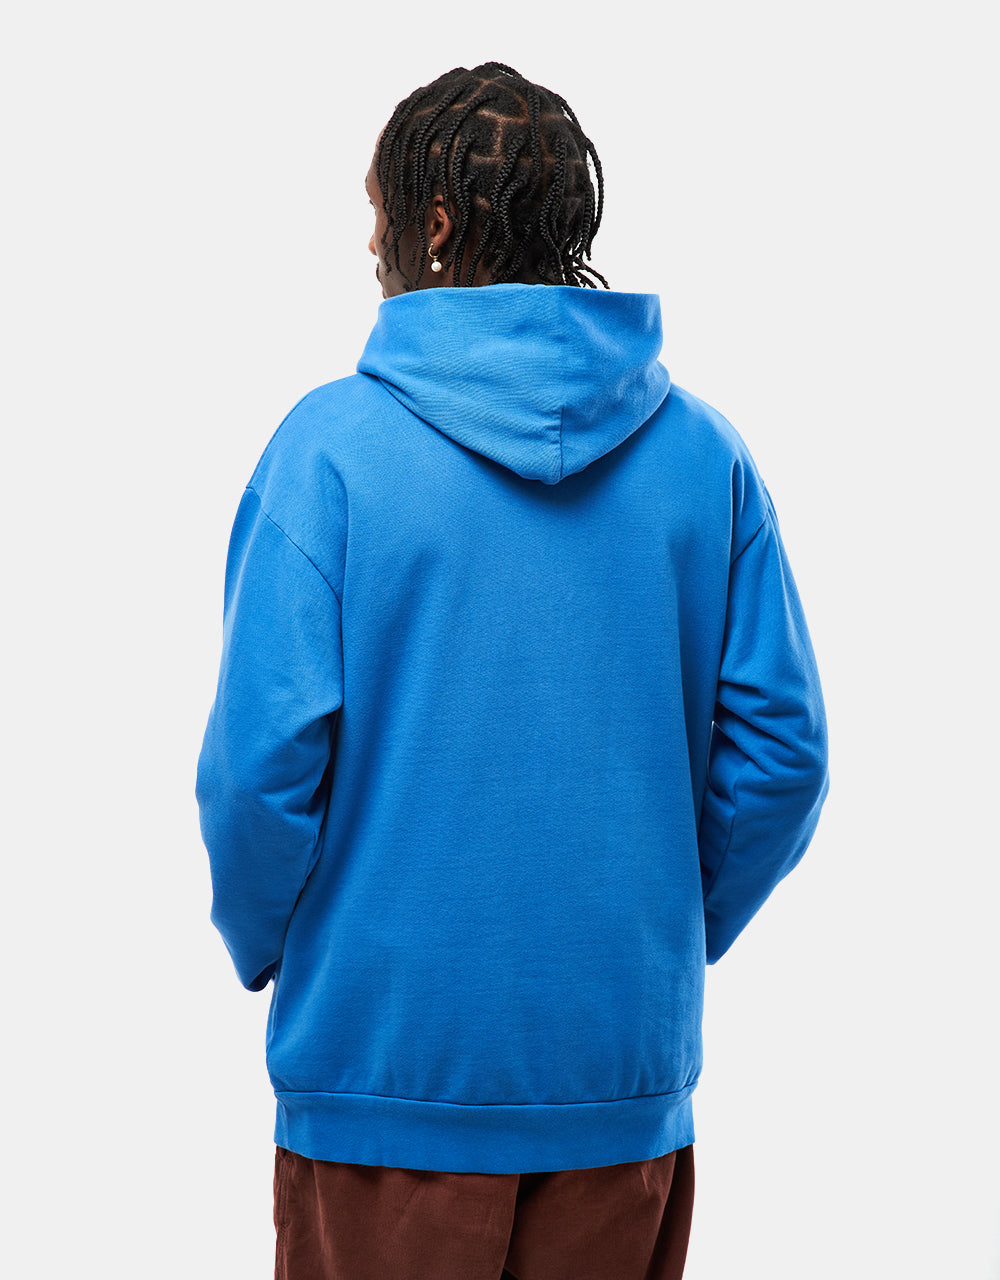 Tired Tired'S Pullover Hoodie - Royal